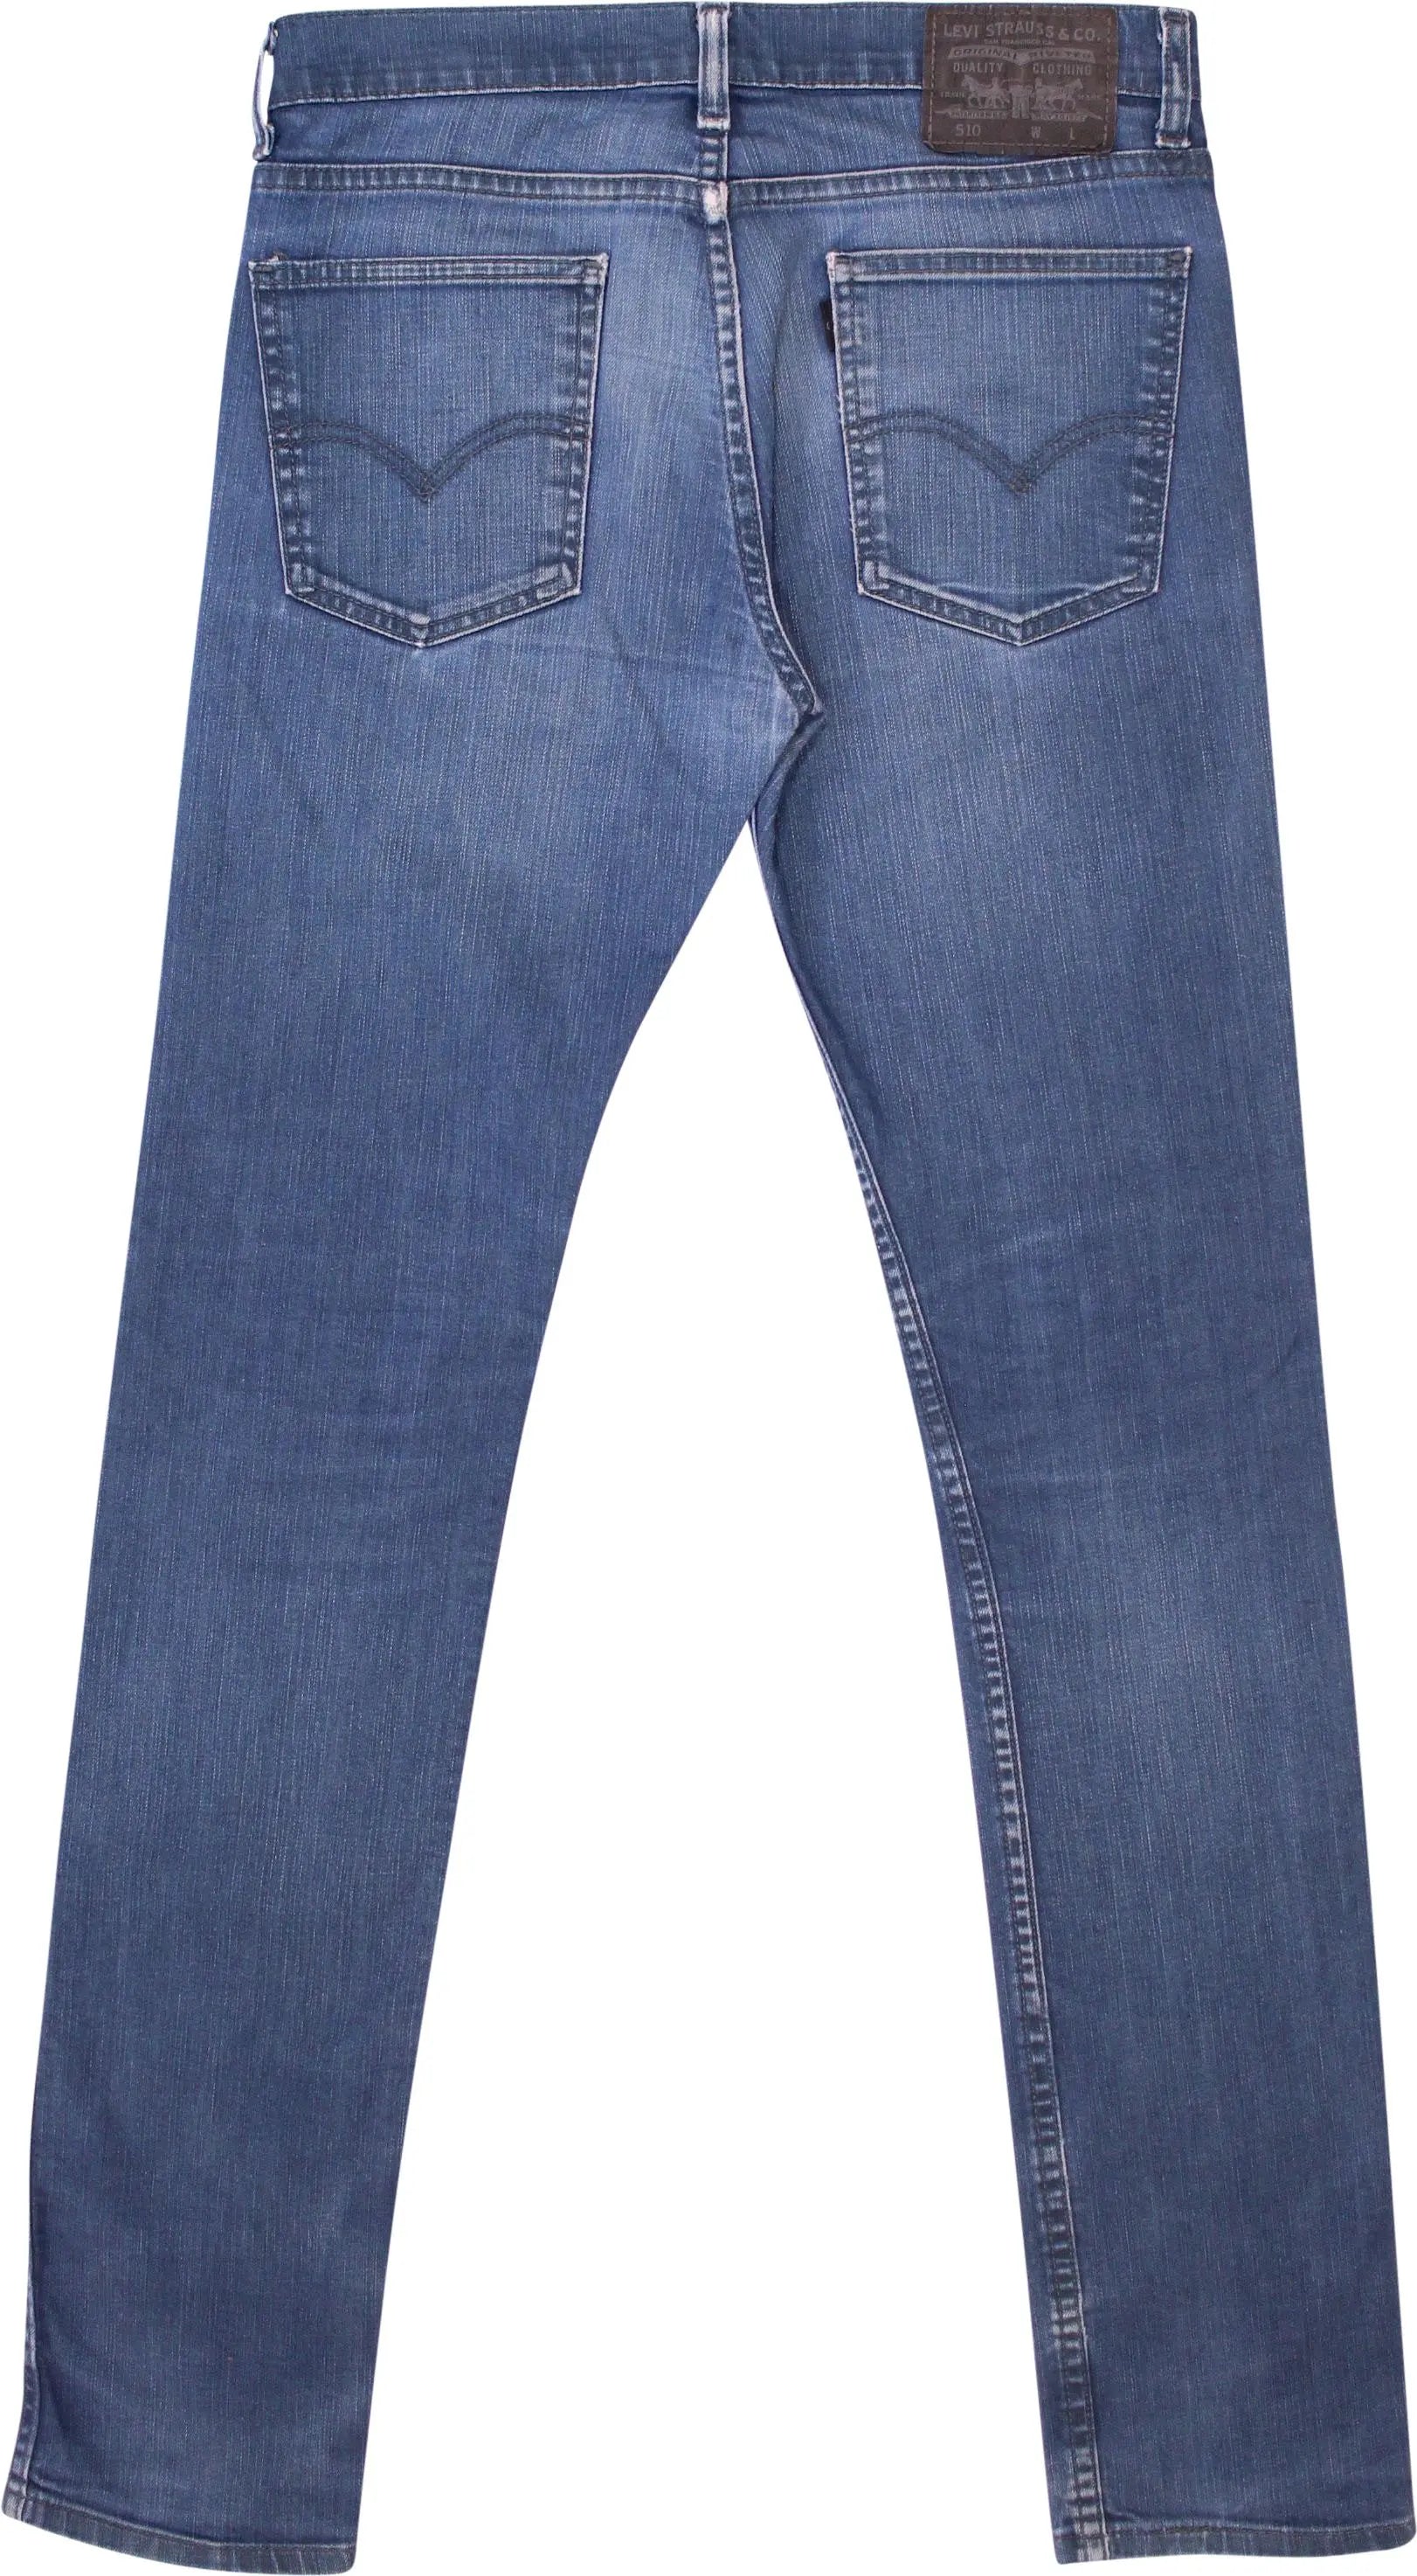 Levi's - Blue Jeans by Levi's- ThriftTale.com - Vintage and second handclothing